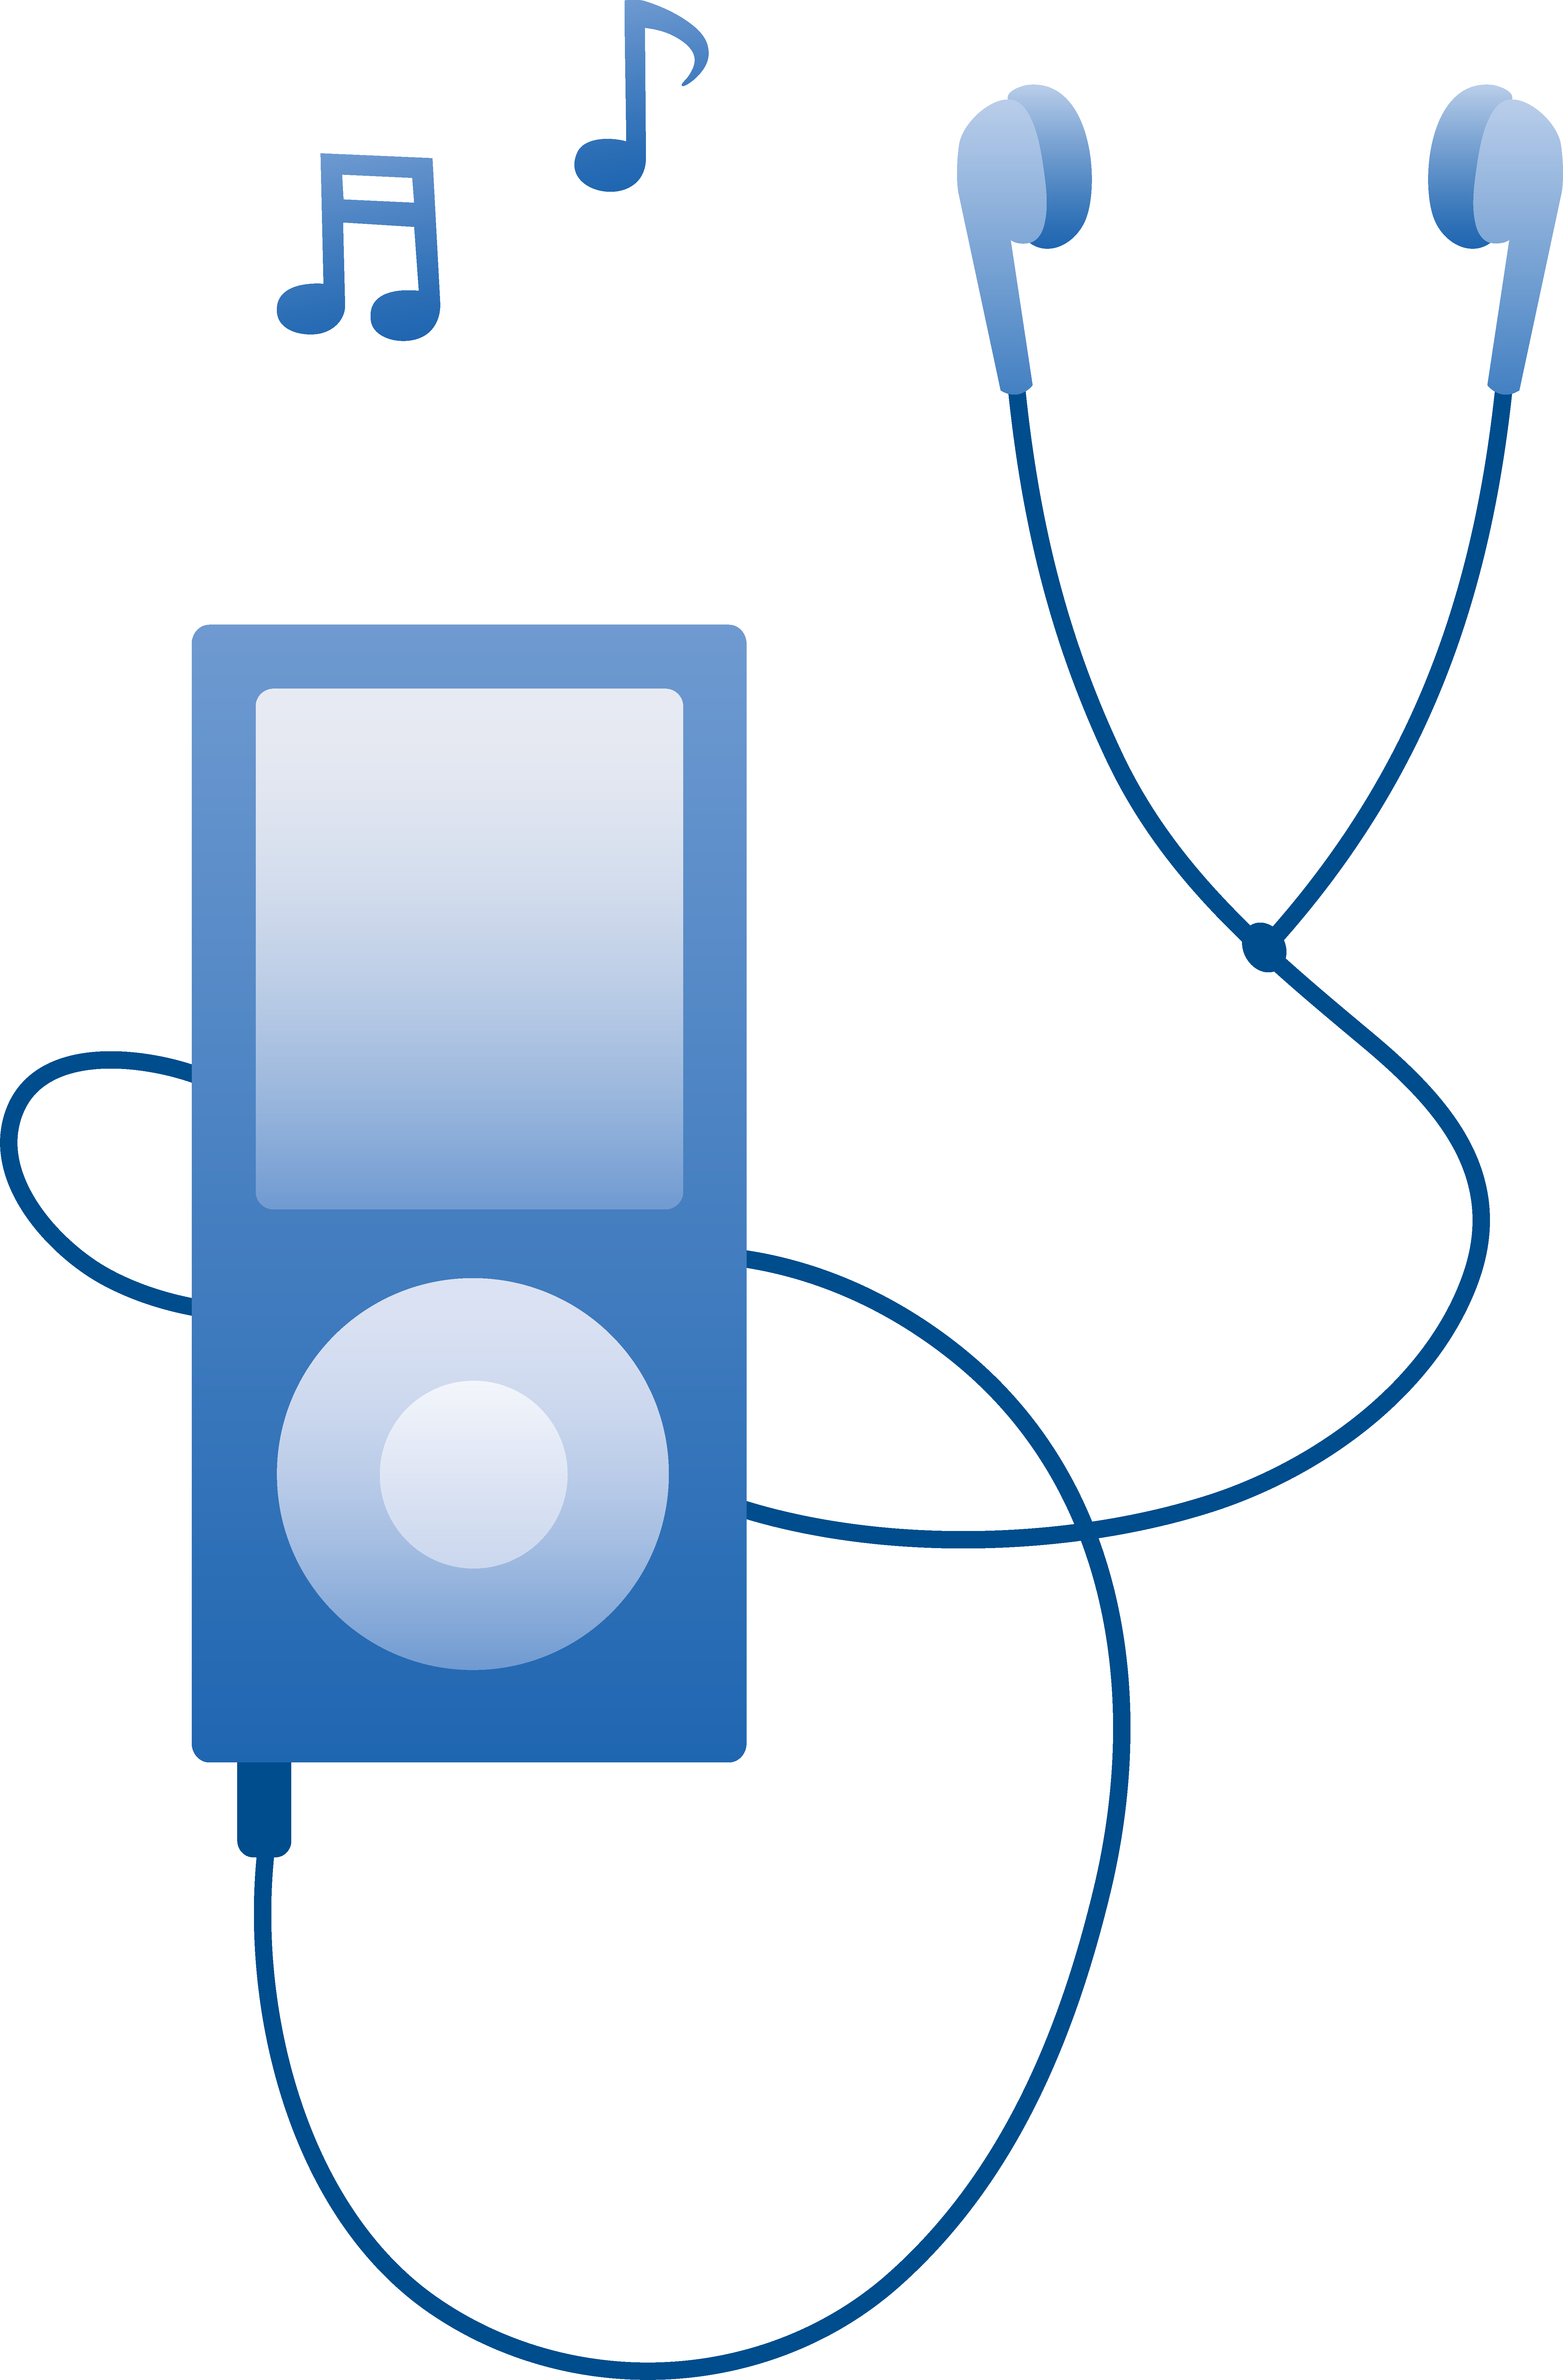 A Blue Music Player With A Cord